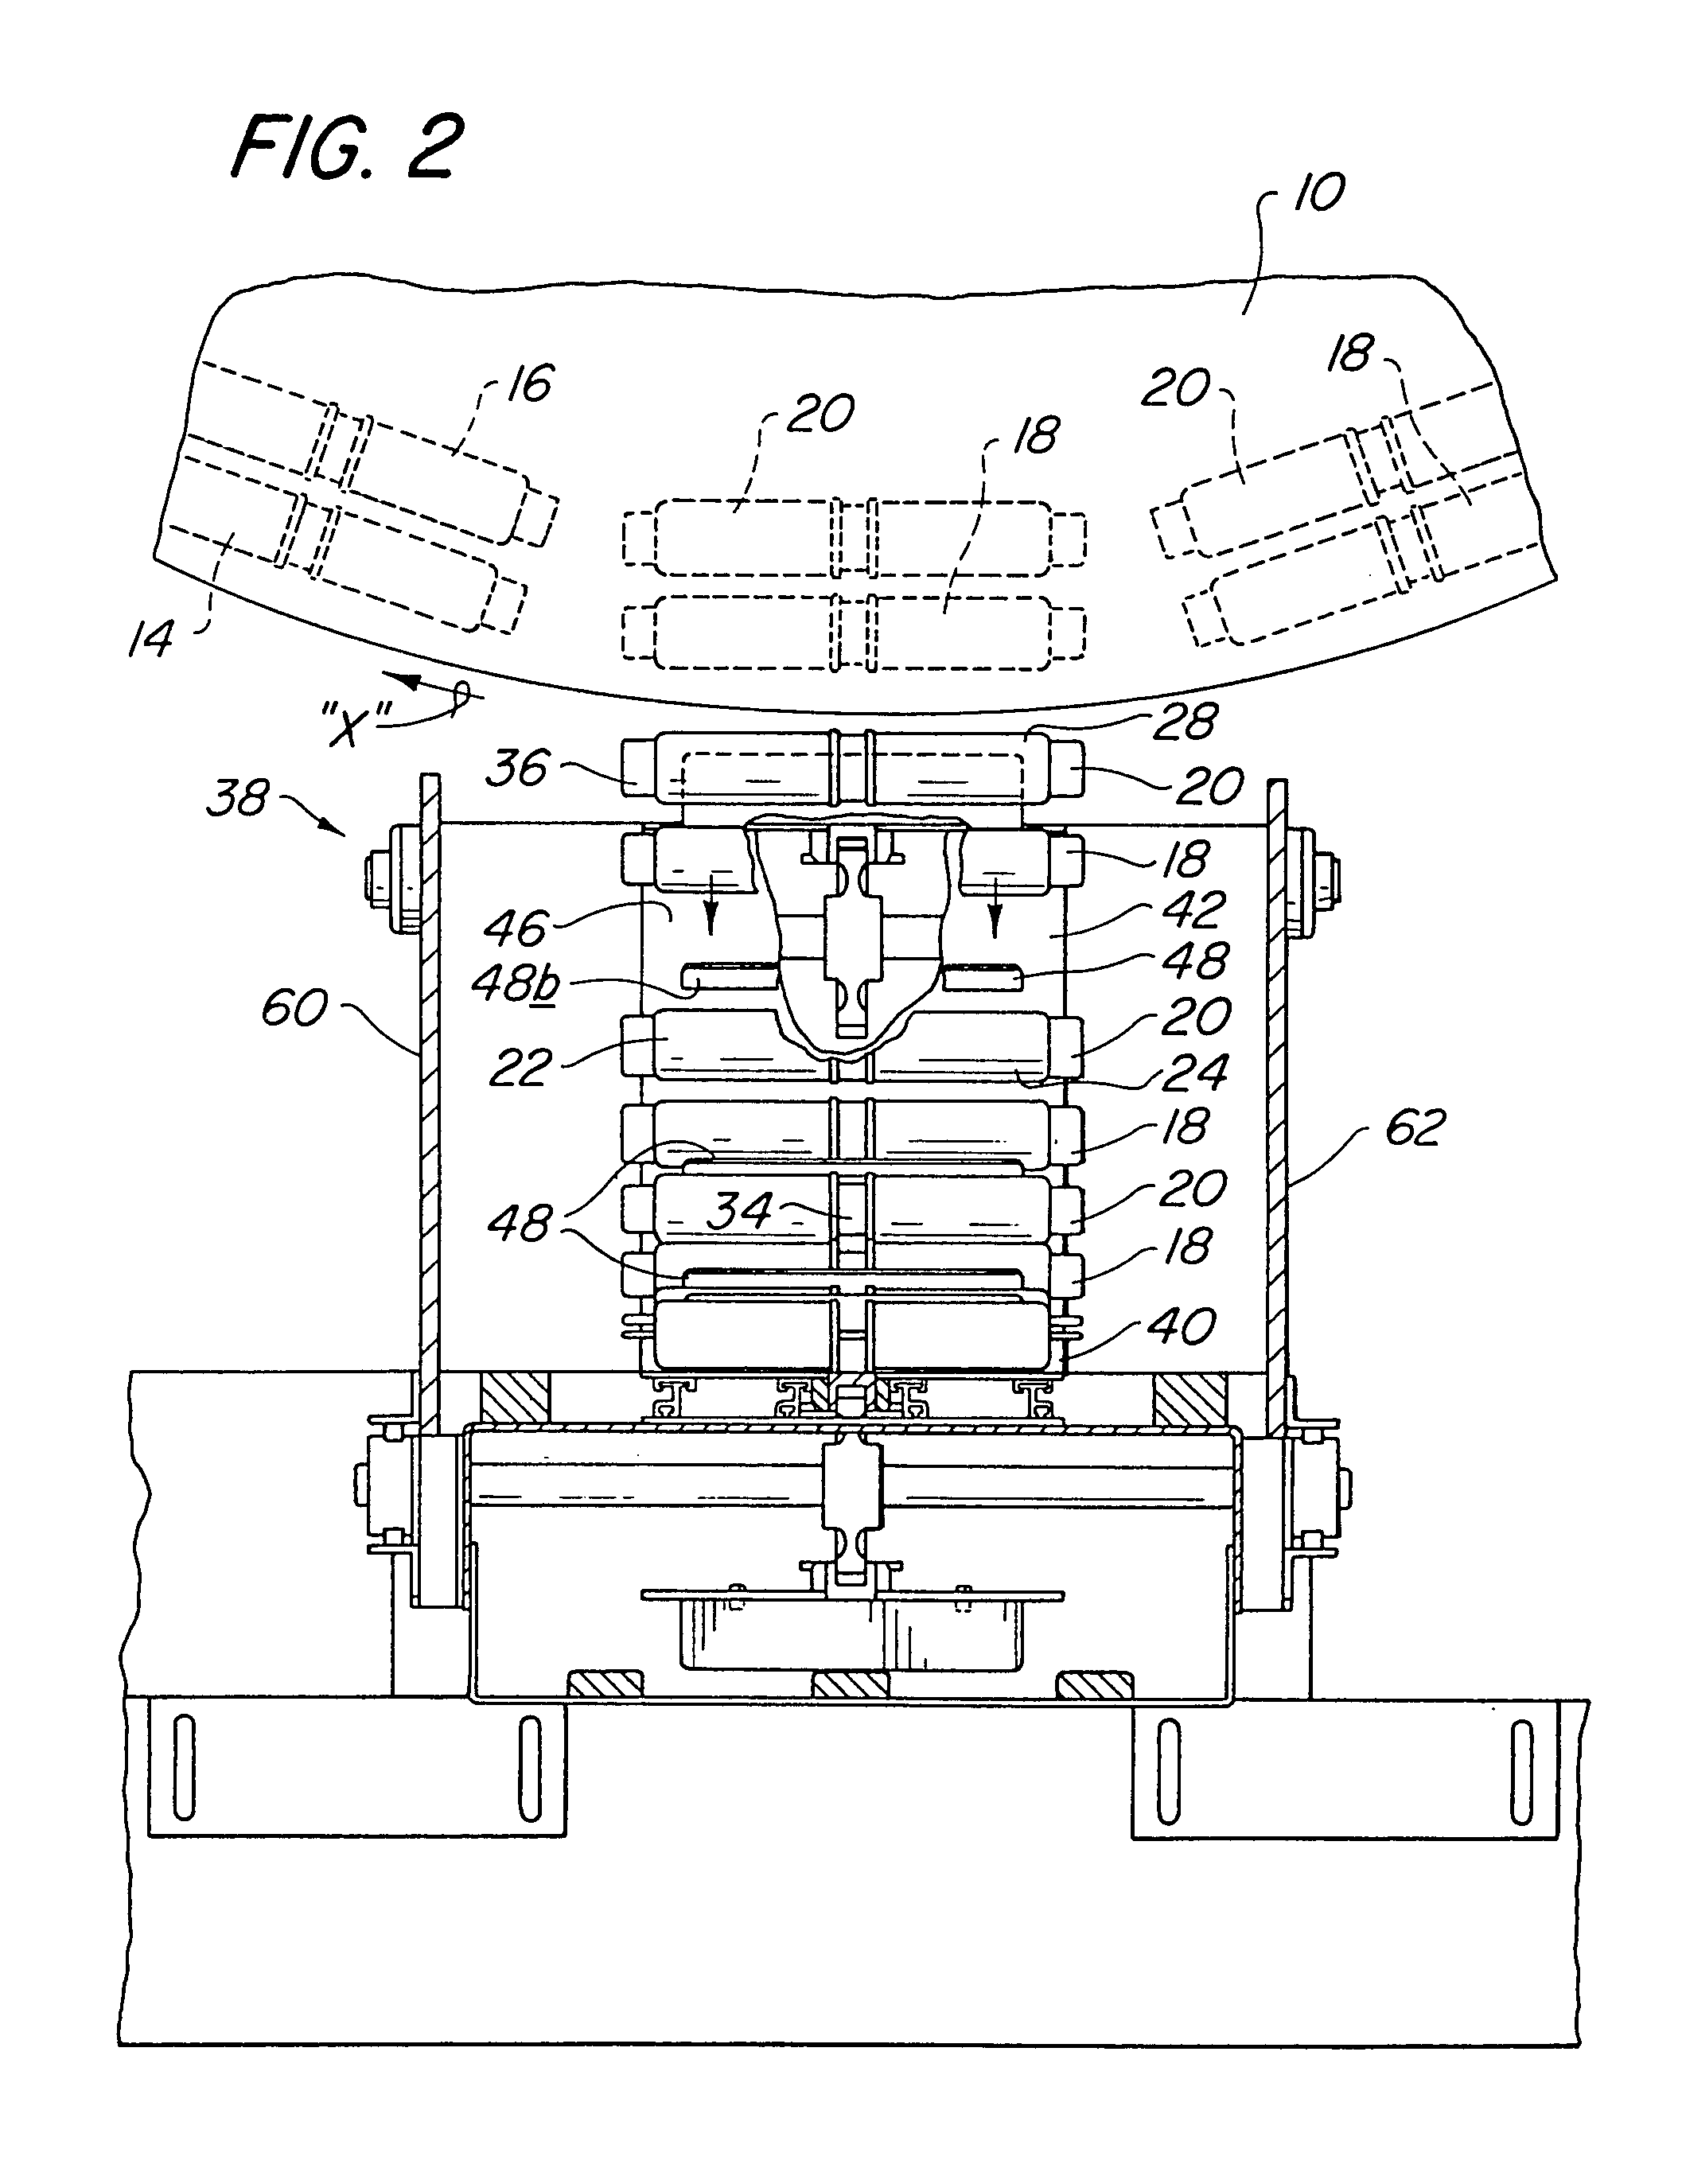 Takeout and transfer apparatus and method for a wheel blow molding machine